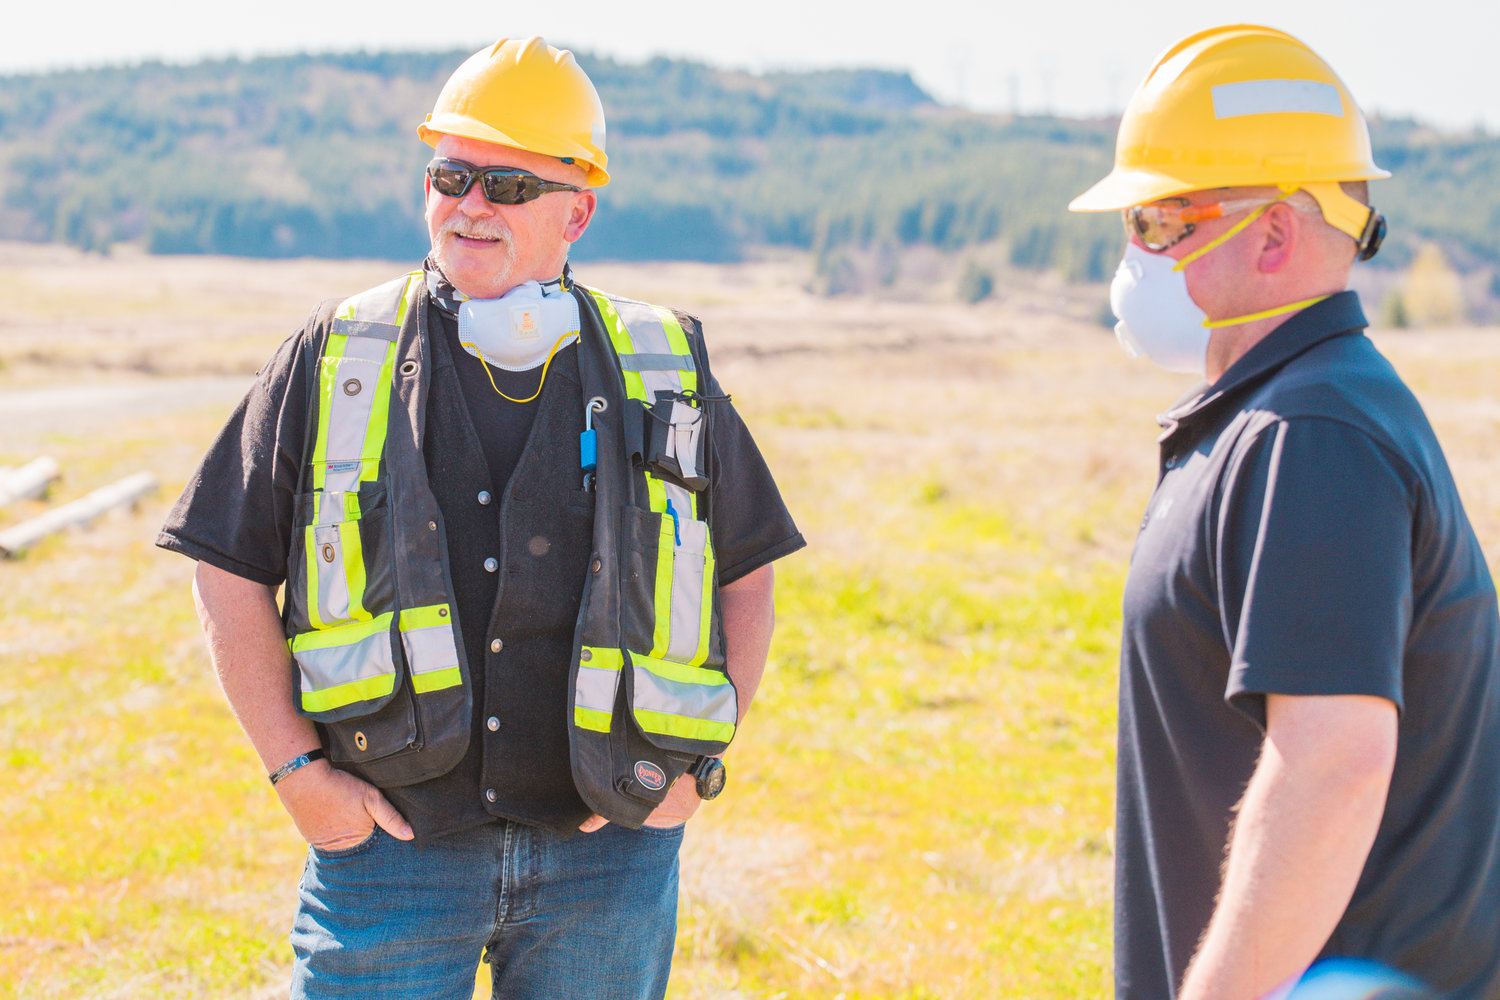 Mike Lydon and Cody Duncan talk about the wildlife they see while working around TransAlta Centralia last week.